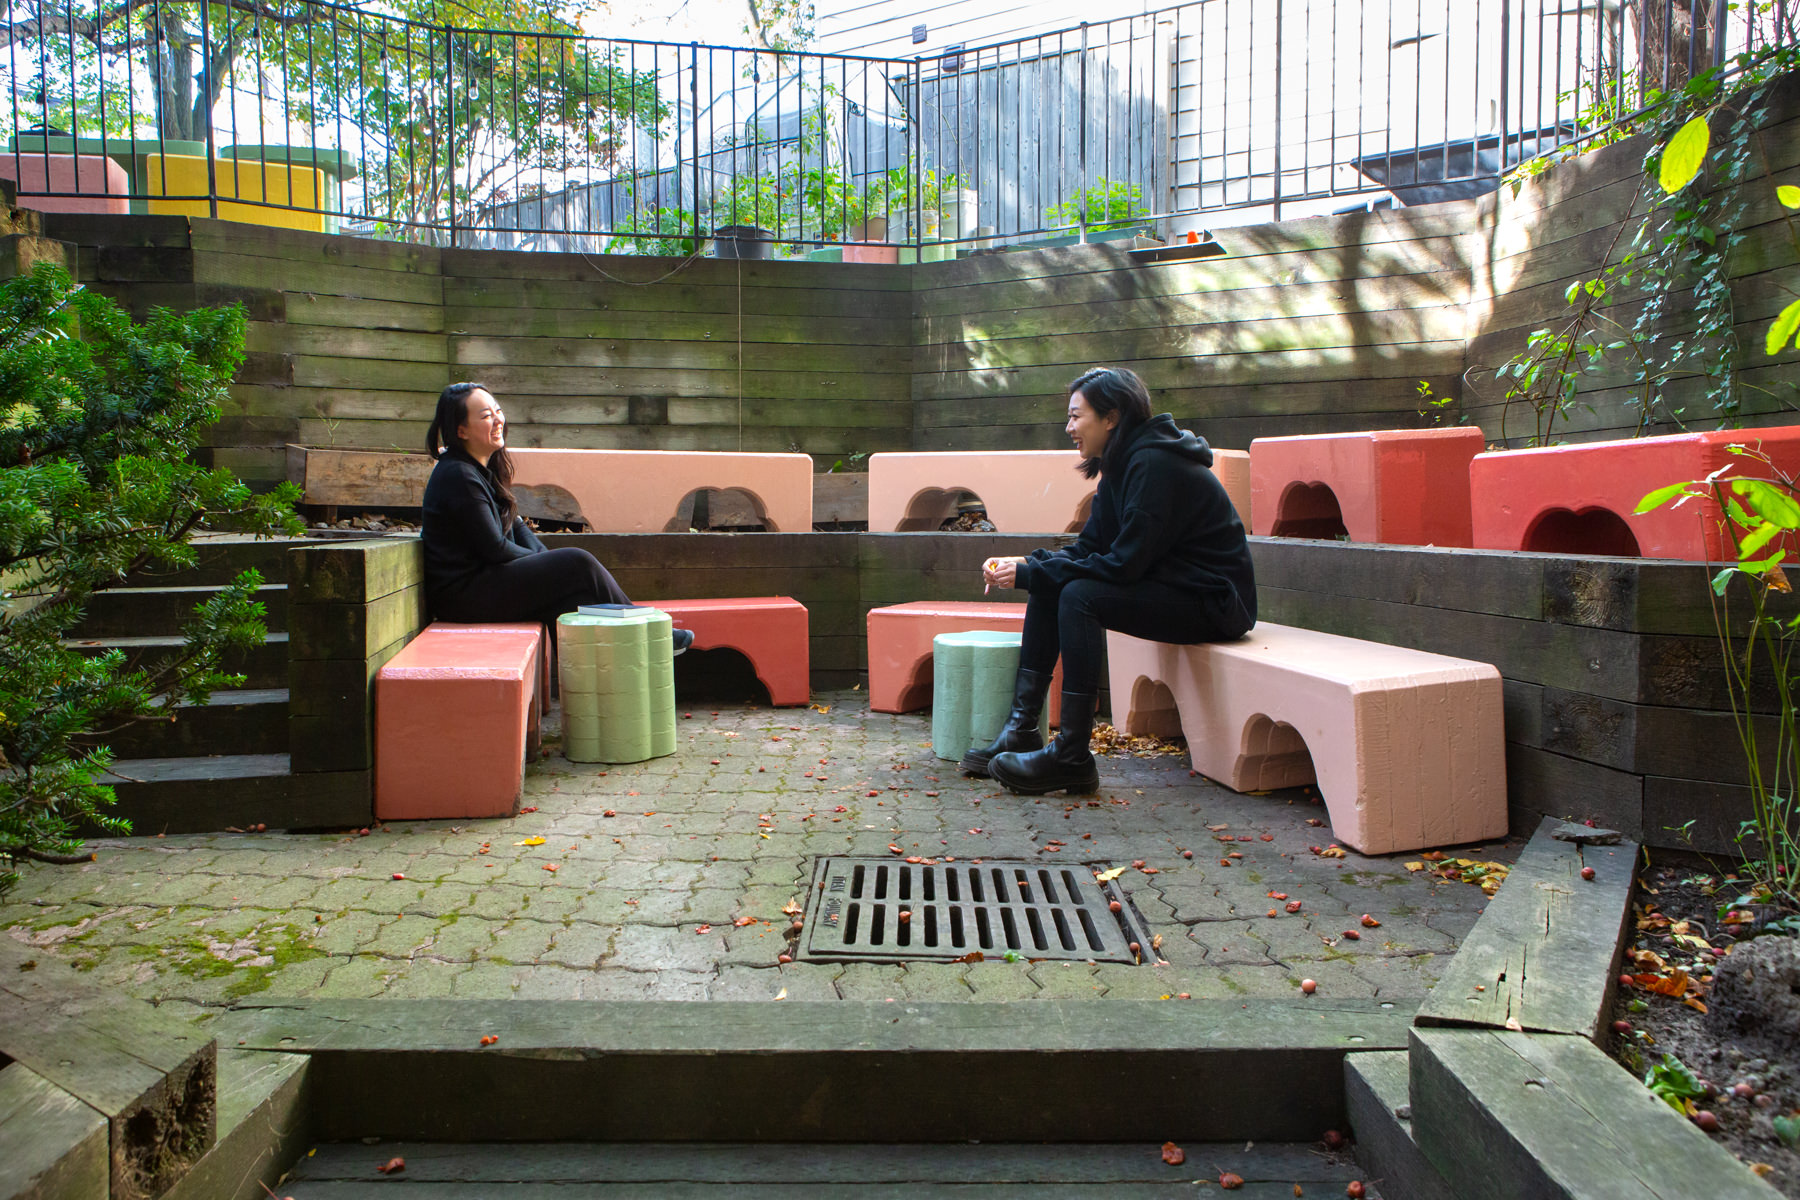 Colourful blacks from Cecil Community Planting Imagination project are neatly arranged in a courtyard. 2 people sit on adjacent blocks in conversation.